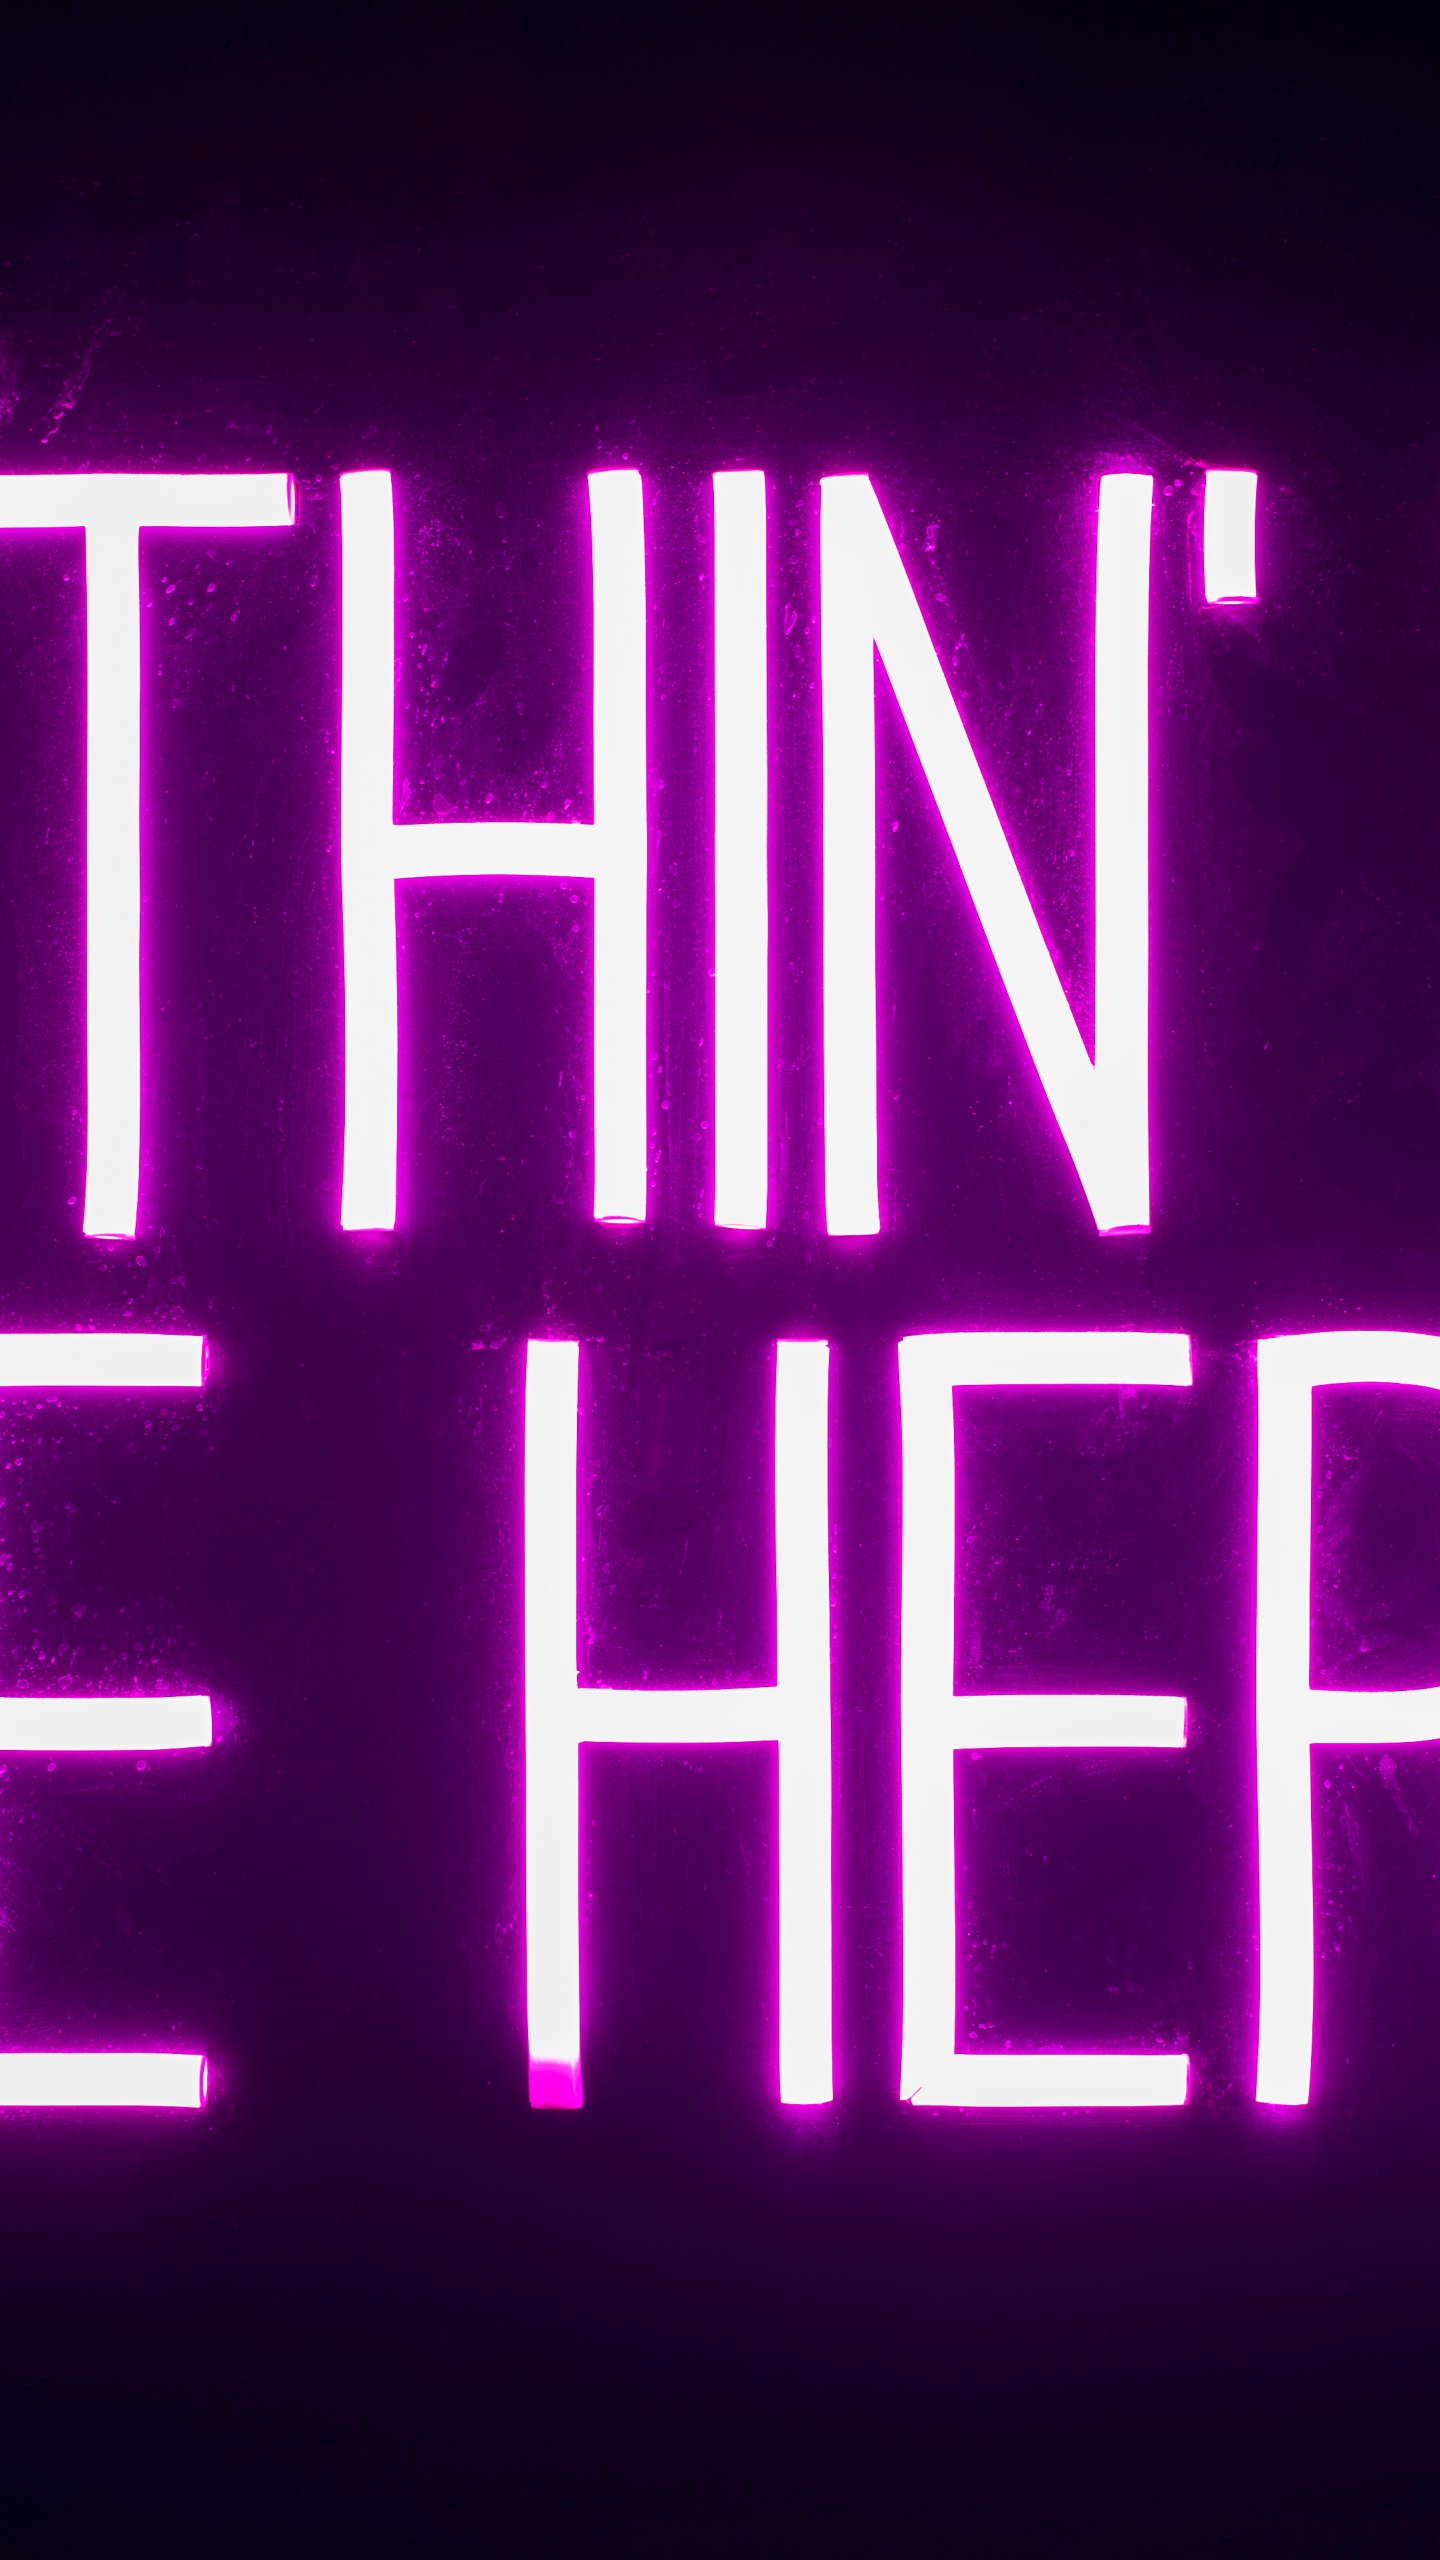 Nothing to See Here Wallpaper 4K, Neon sign, Dark background, Purple